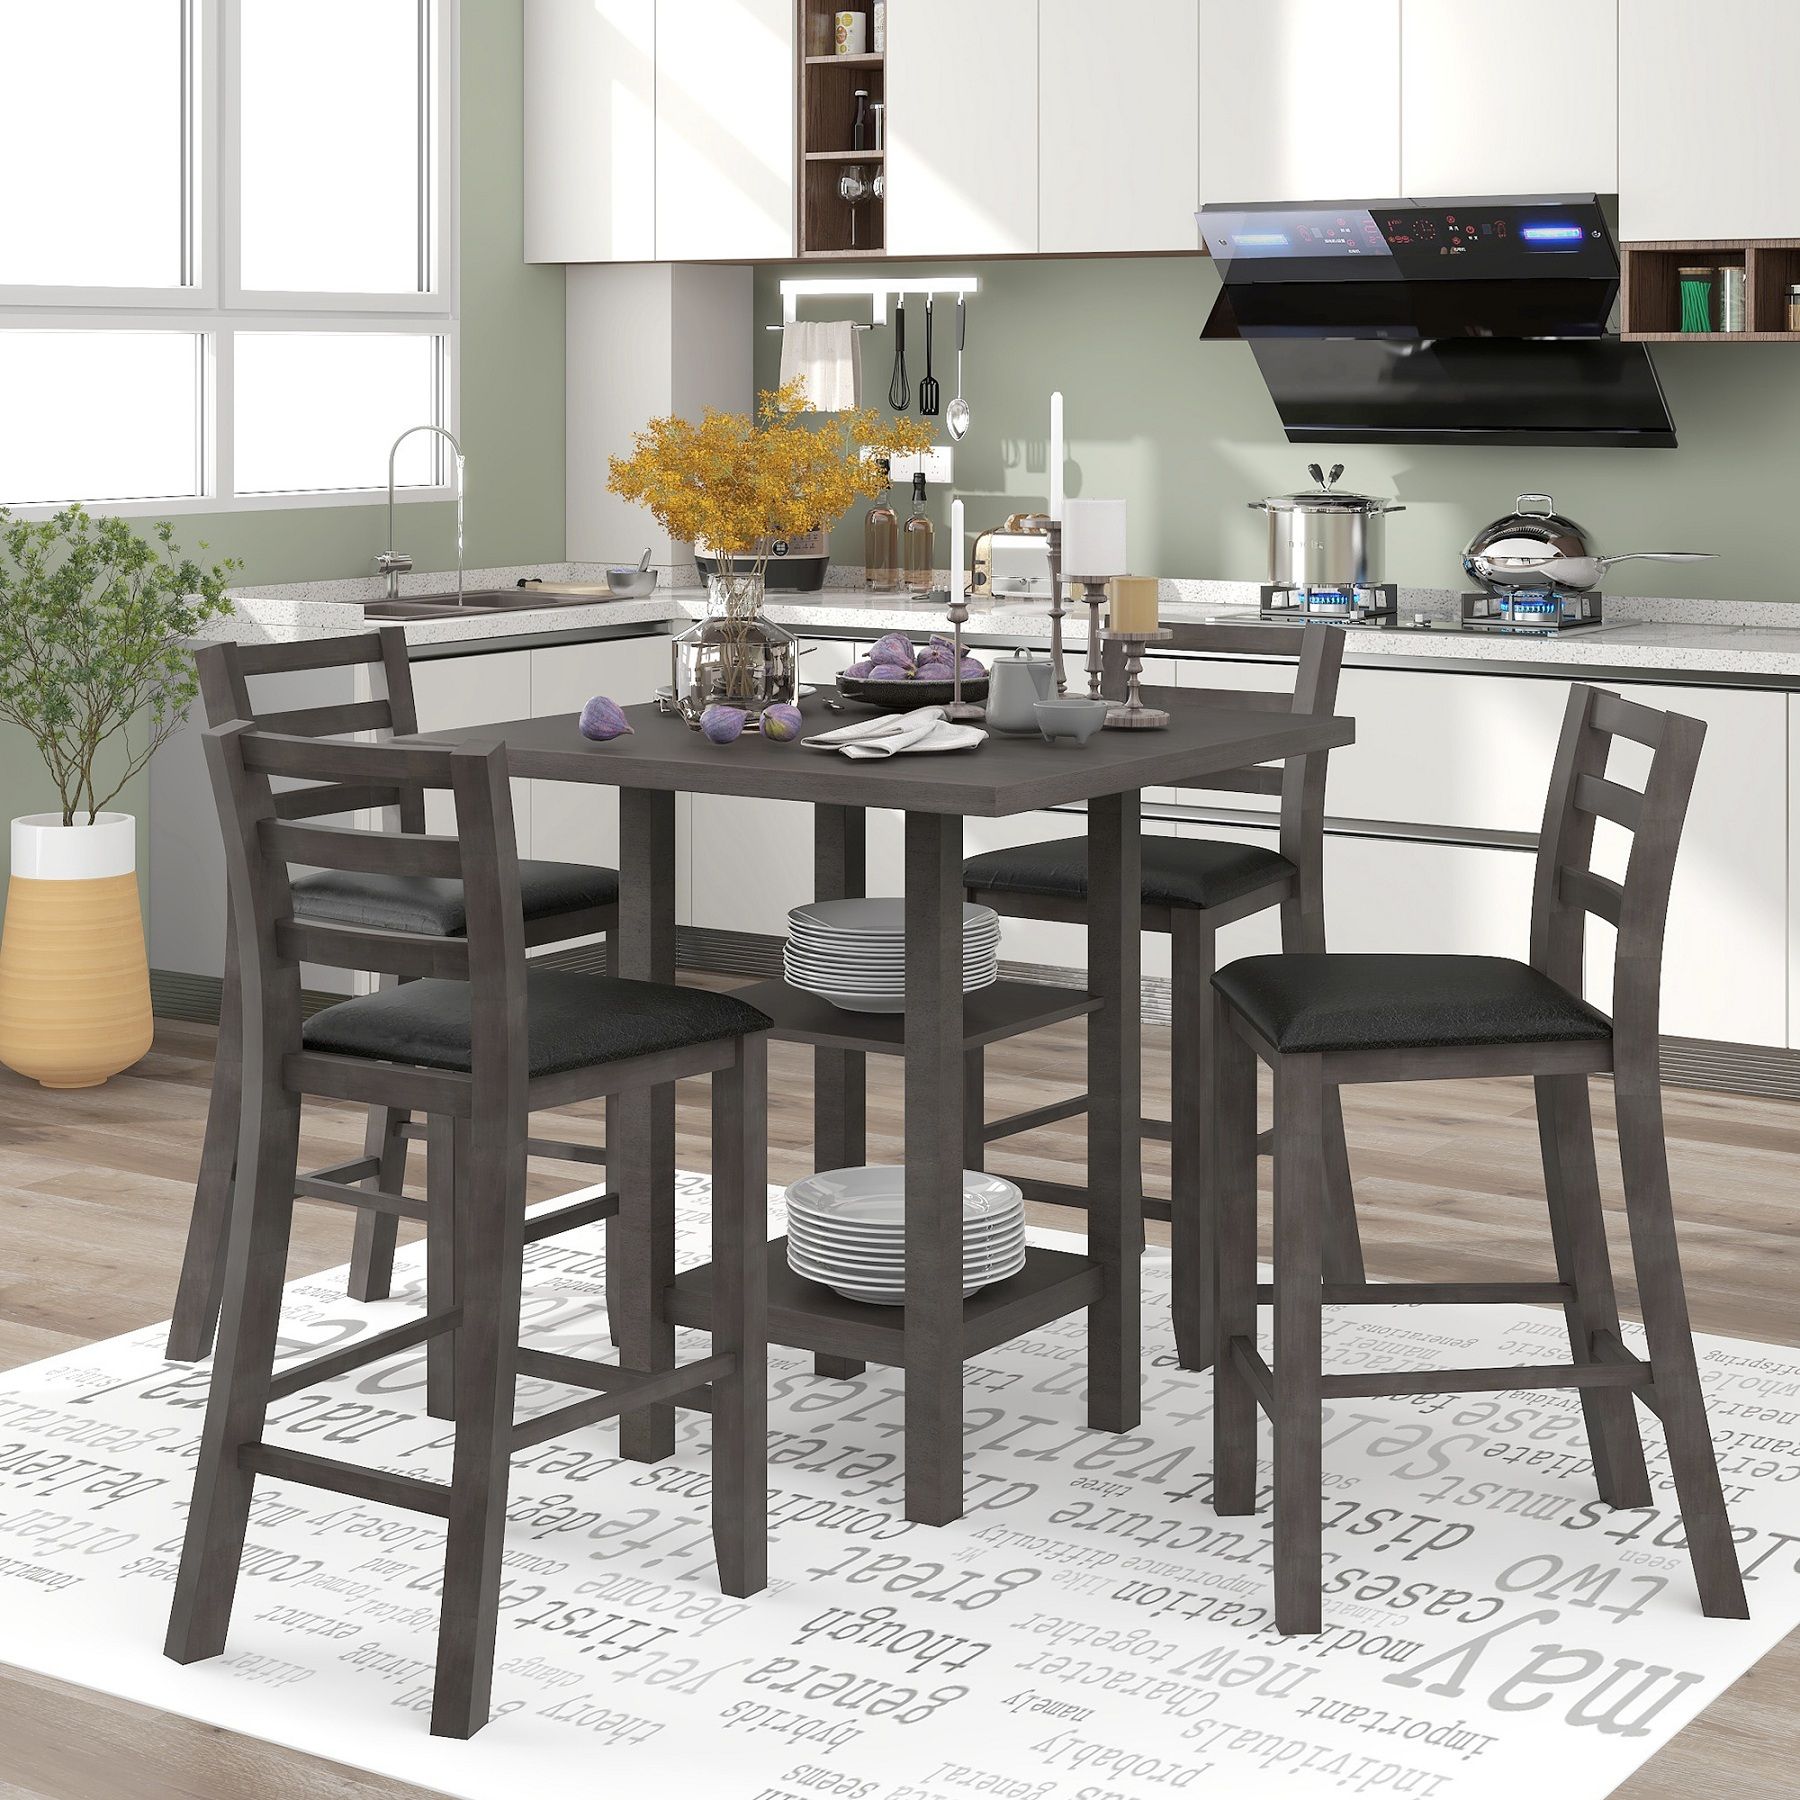 Skyland 5 Piece Wooden Counter Height Dining Set, Square Dining Table Pertaining To Wood Bistro Table And Chairs Sets (View 8 of 15)